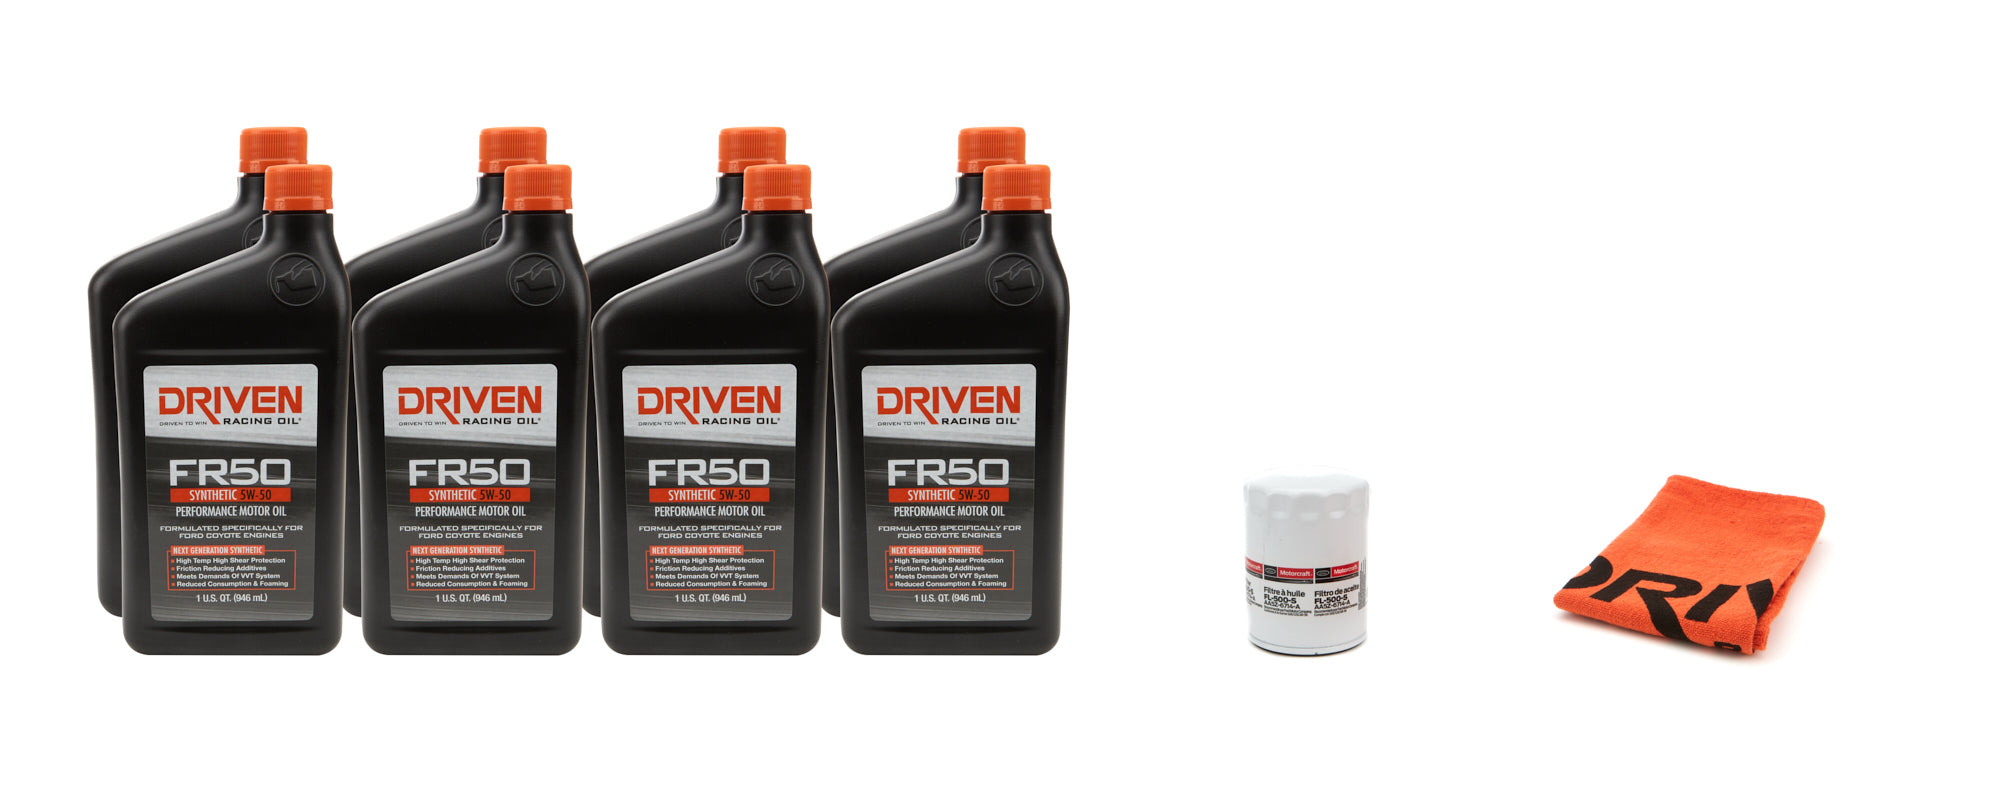 Driven Racing Oil 5w50 Oil Change Kit 12- 13 Mustang Boss 5.0L 9Qt Oils, Fluids and Additives Motor Oil main image